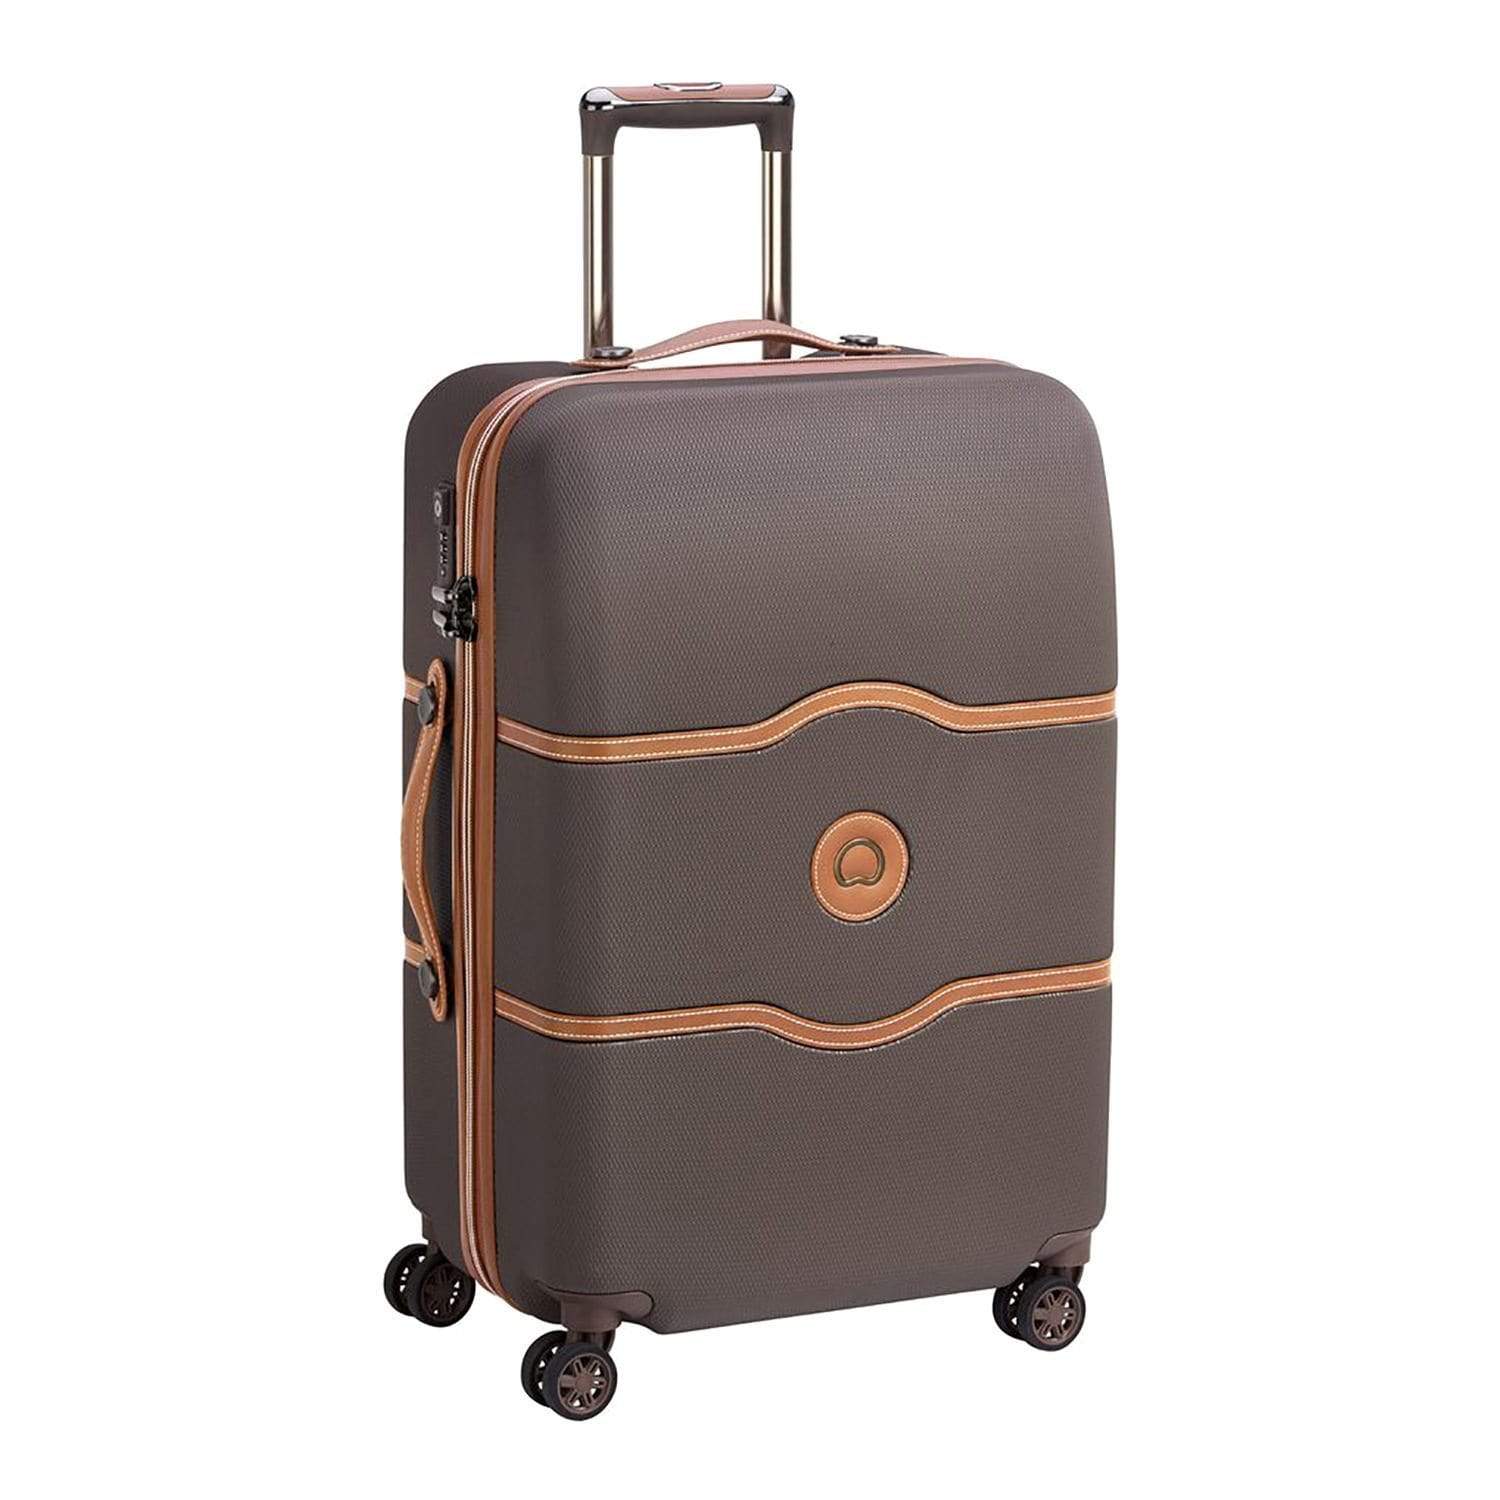 Delsey Chatelet Air 4 Double Wheel Cabin Trolley Case - Chocolate - 00167281006 CHOCOLATE - Jashanmal Home